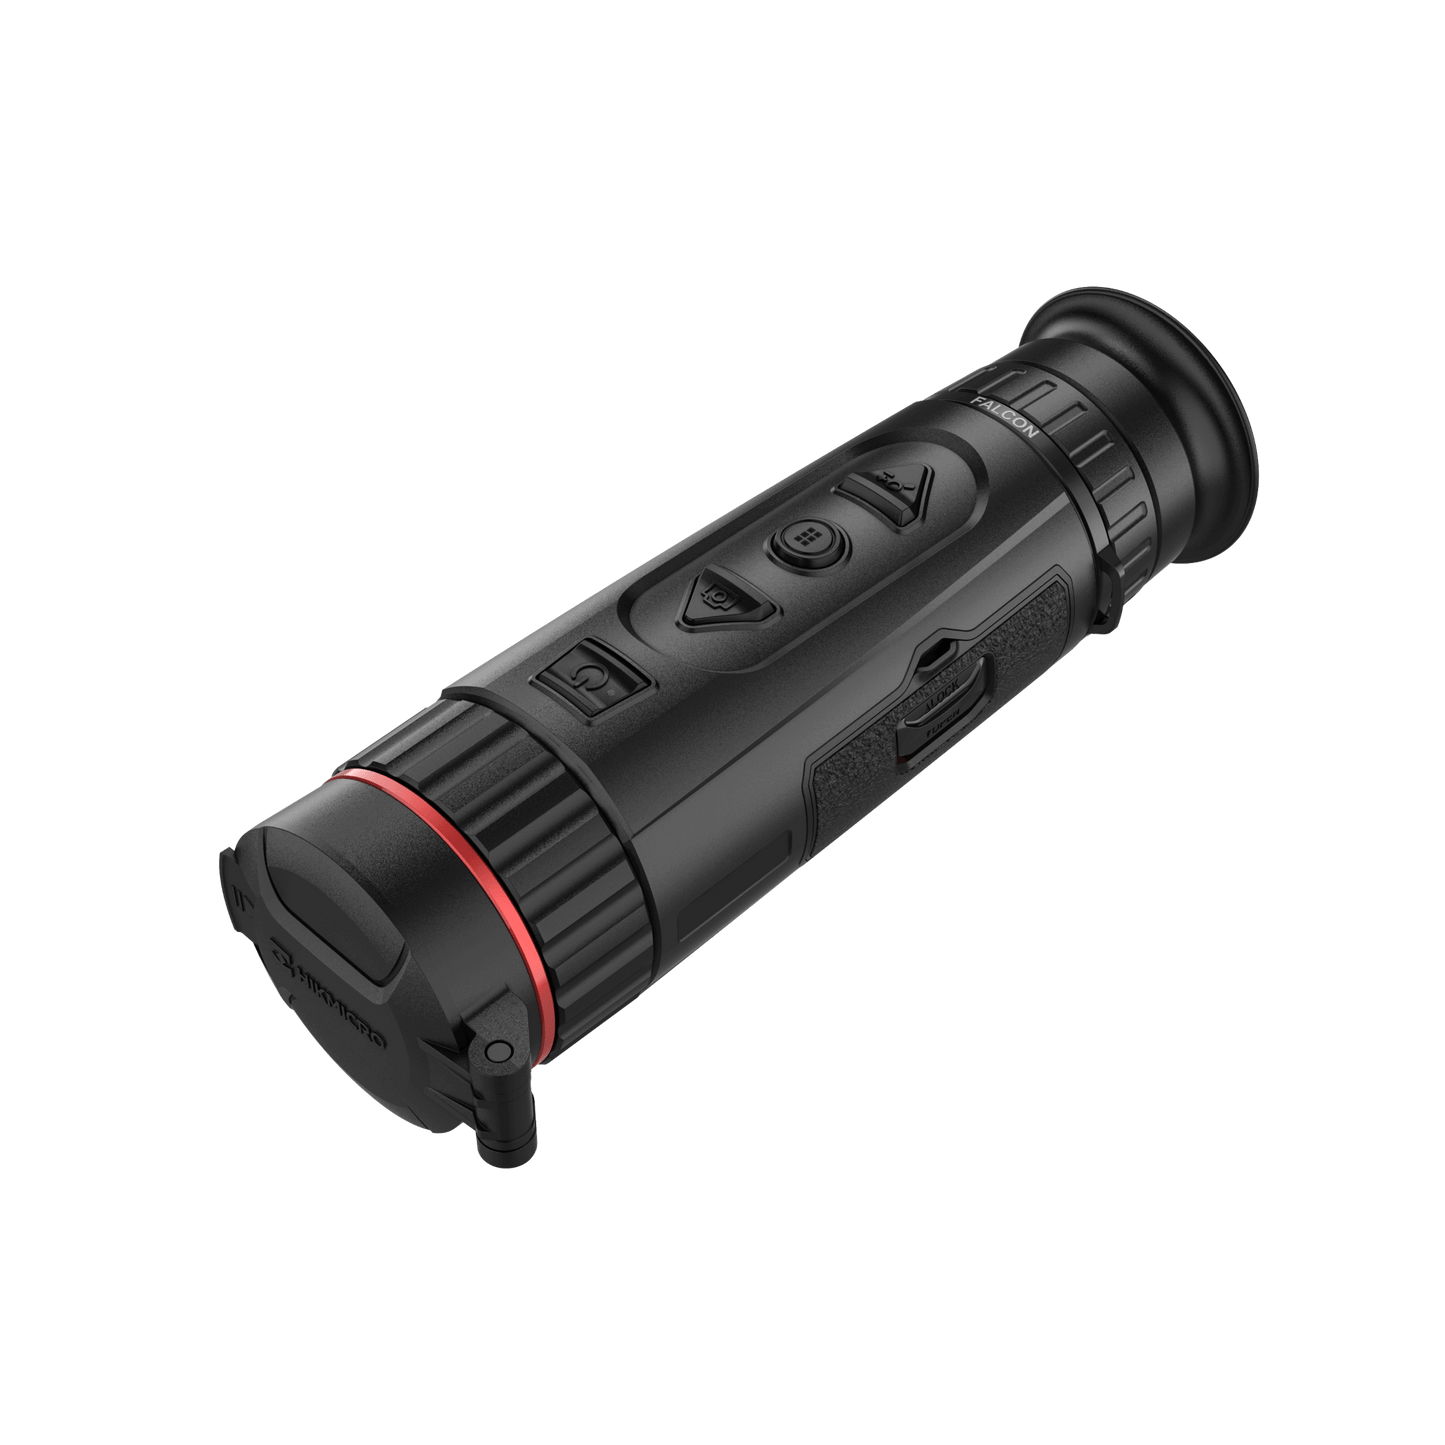 HikMicro Thermal Imaging Monocular for Sale - HikMicro Falcon Series FQ35 - HM-TS46-35XG_W-FQ35 - Front Left view from above